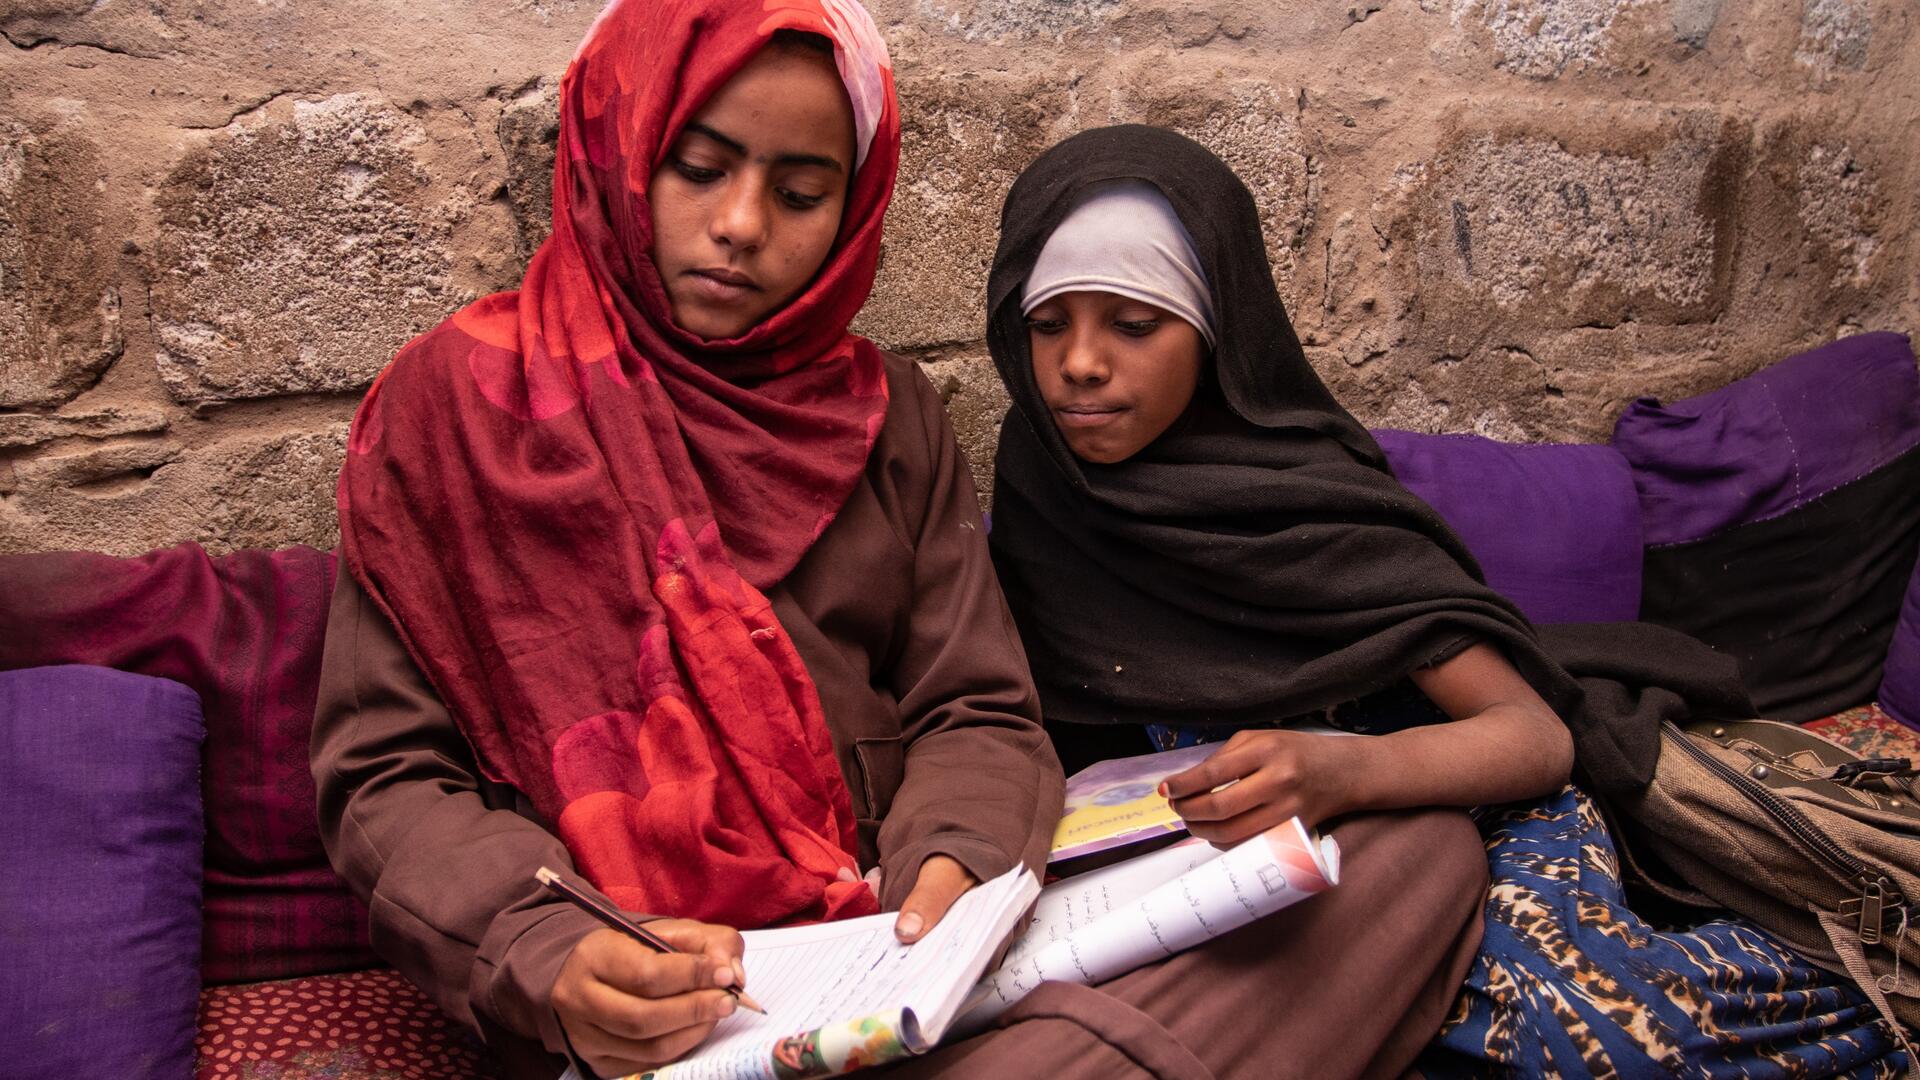 Na'aem, 11, and her best friend Aisha, 10, sit together on the ground studying a school book in a displacement camp in Yemen.. 